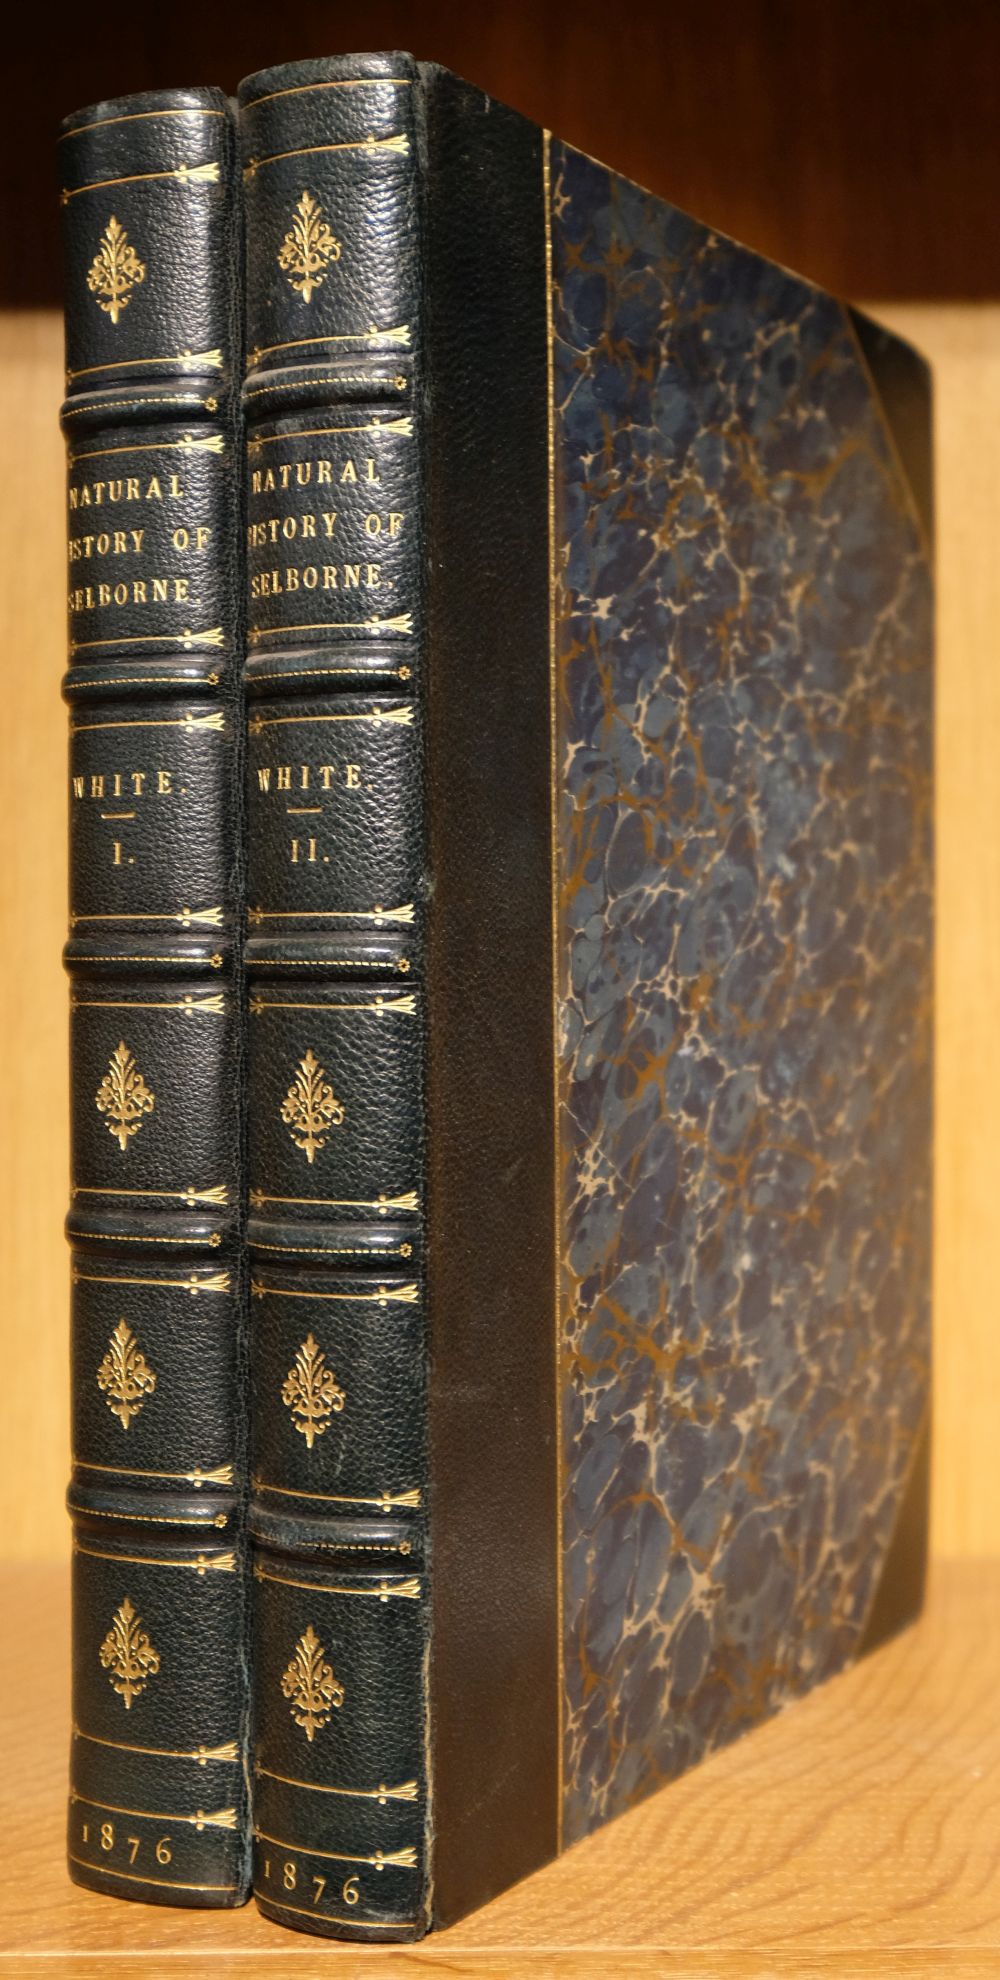 White (Gilbert). Natural History and Antiquities of Selborne, 2 volumes, 1876